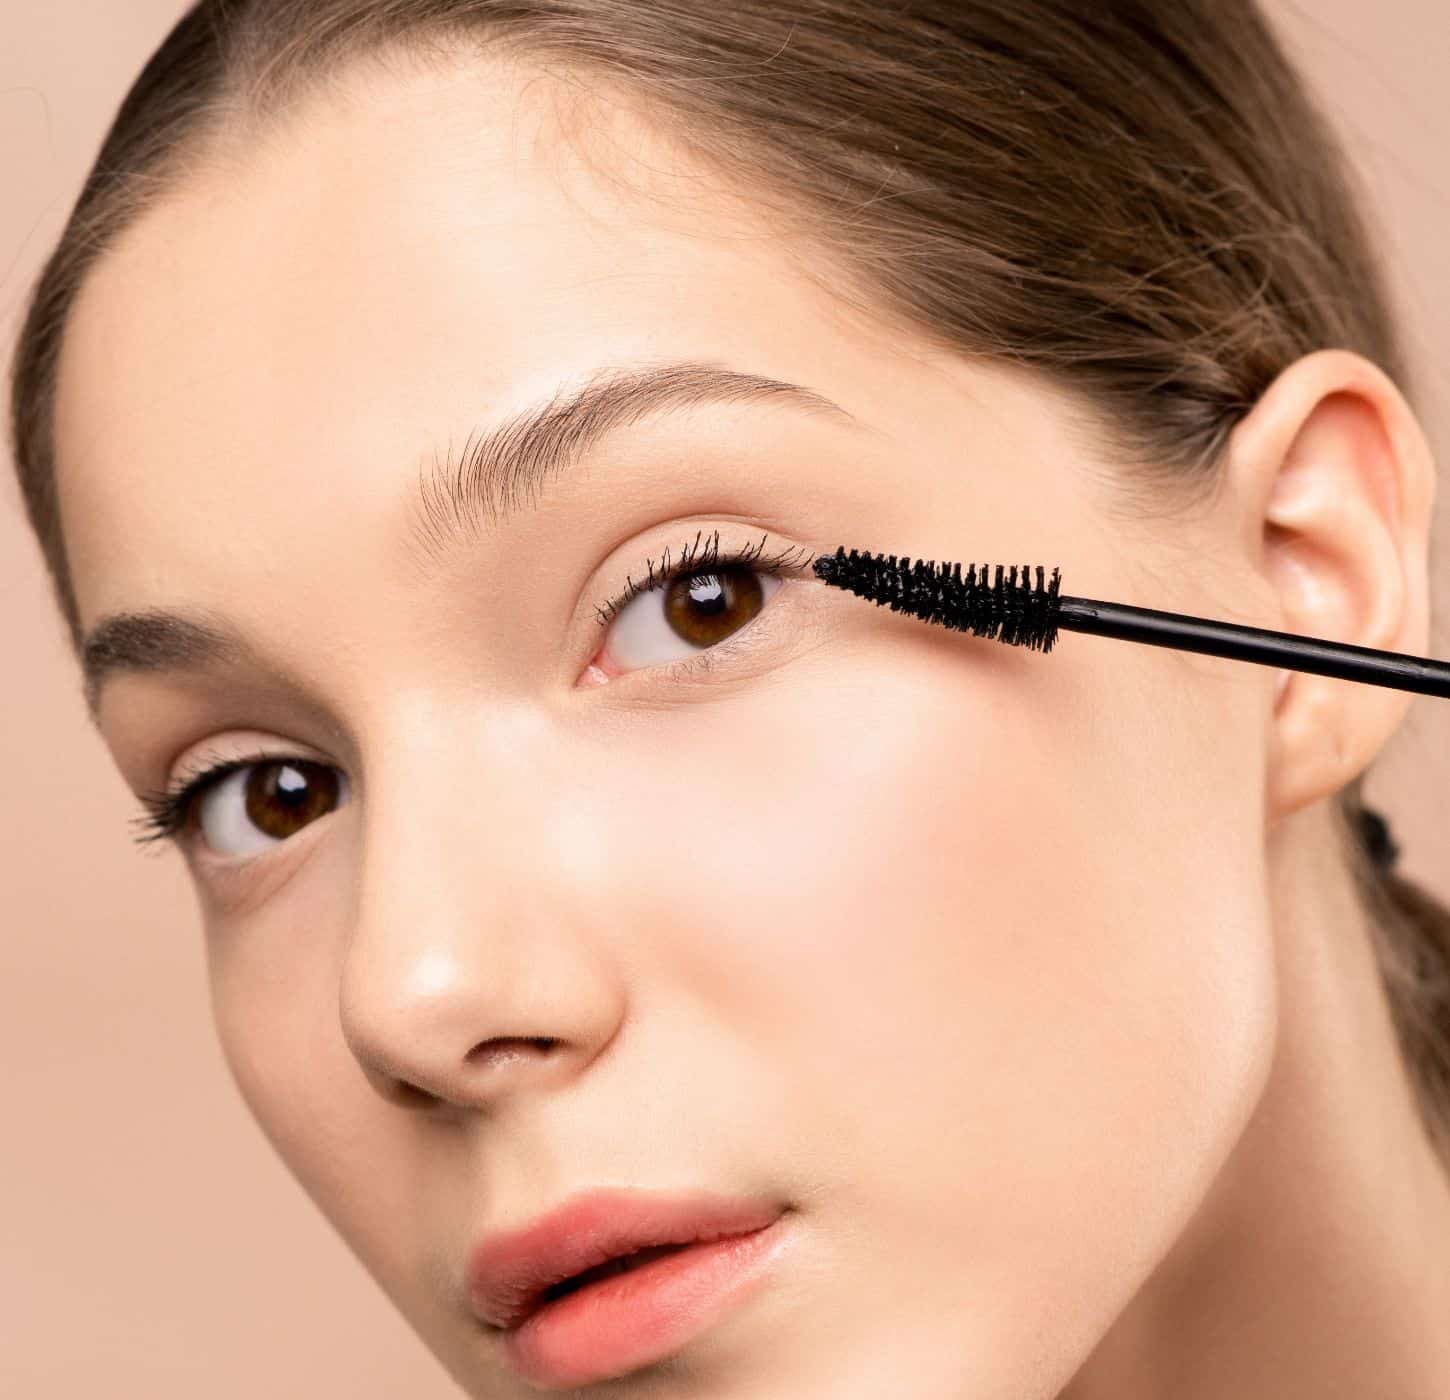 Creative Lashes: 10 Unique and Eye-Catching Eyelash Looks to Try